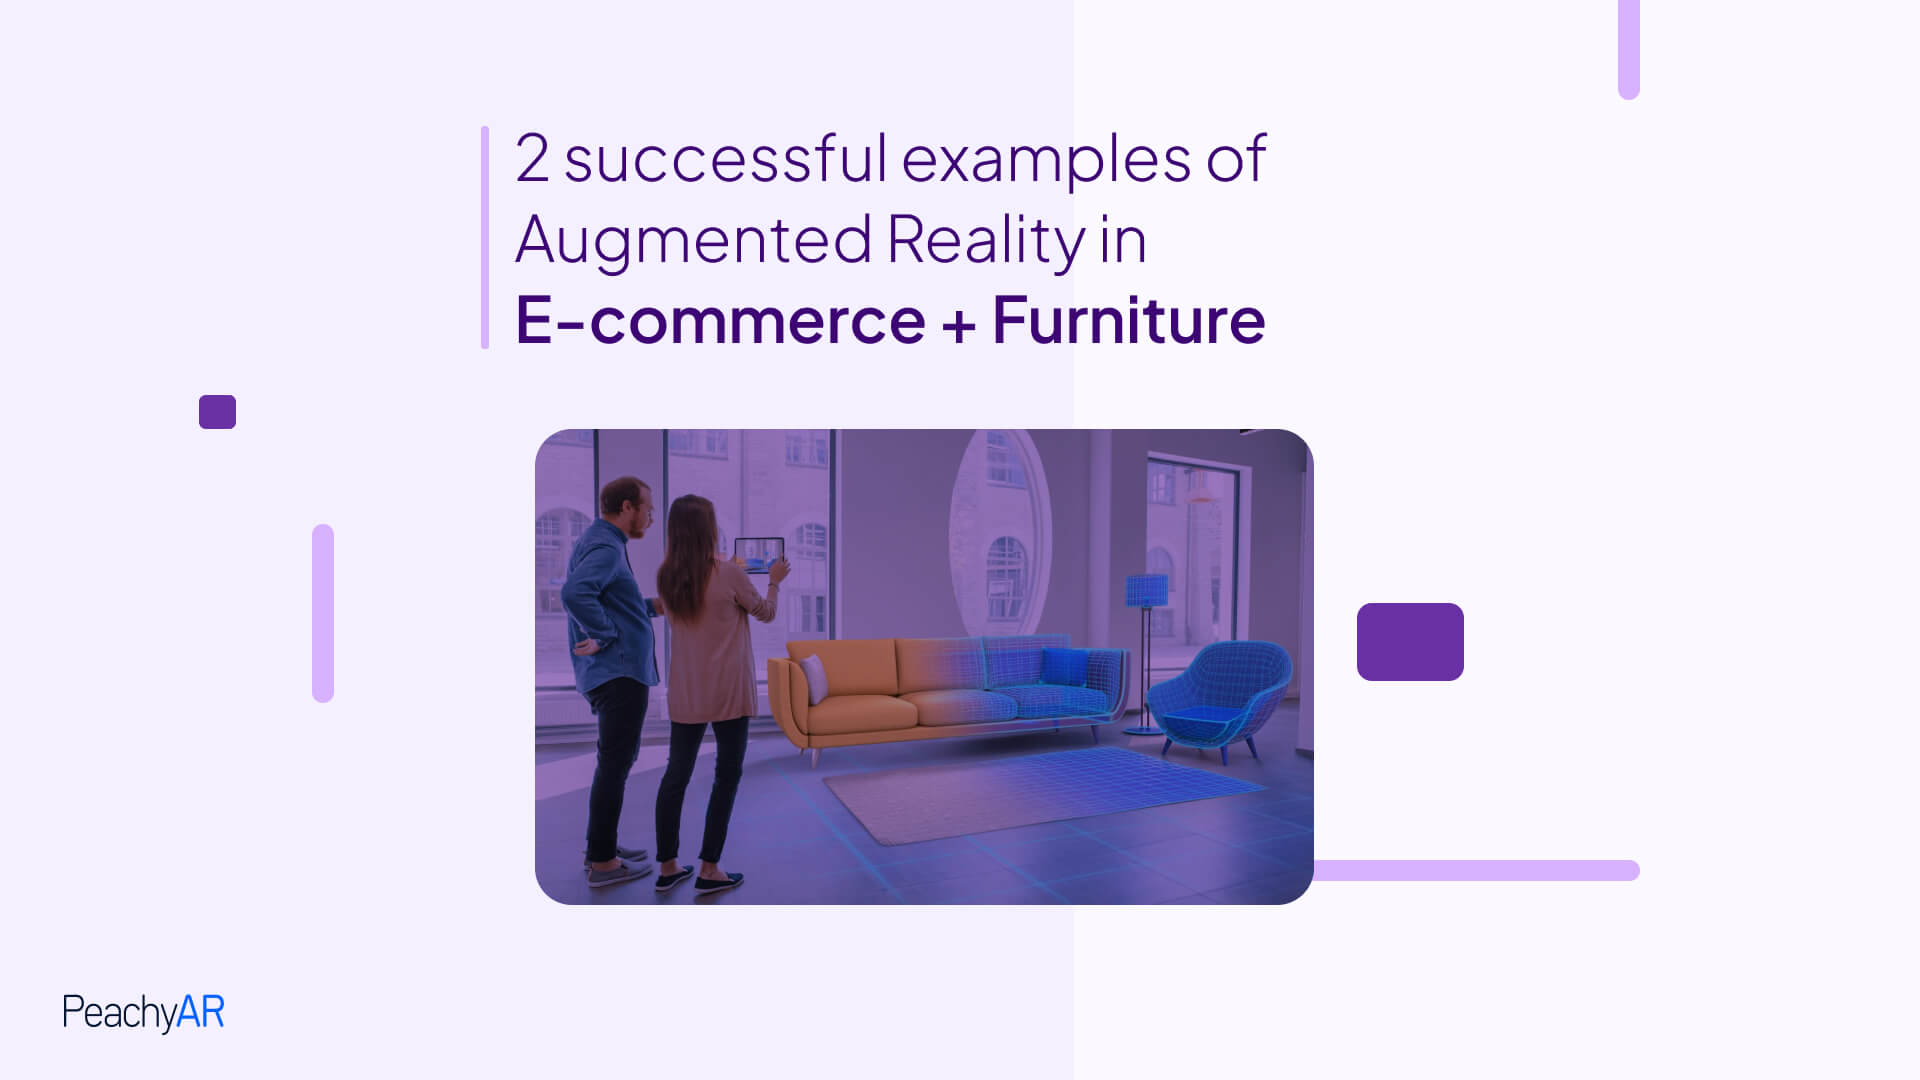 augmented reality in e-commerce